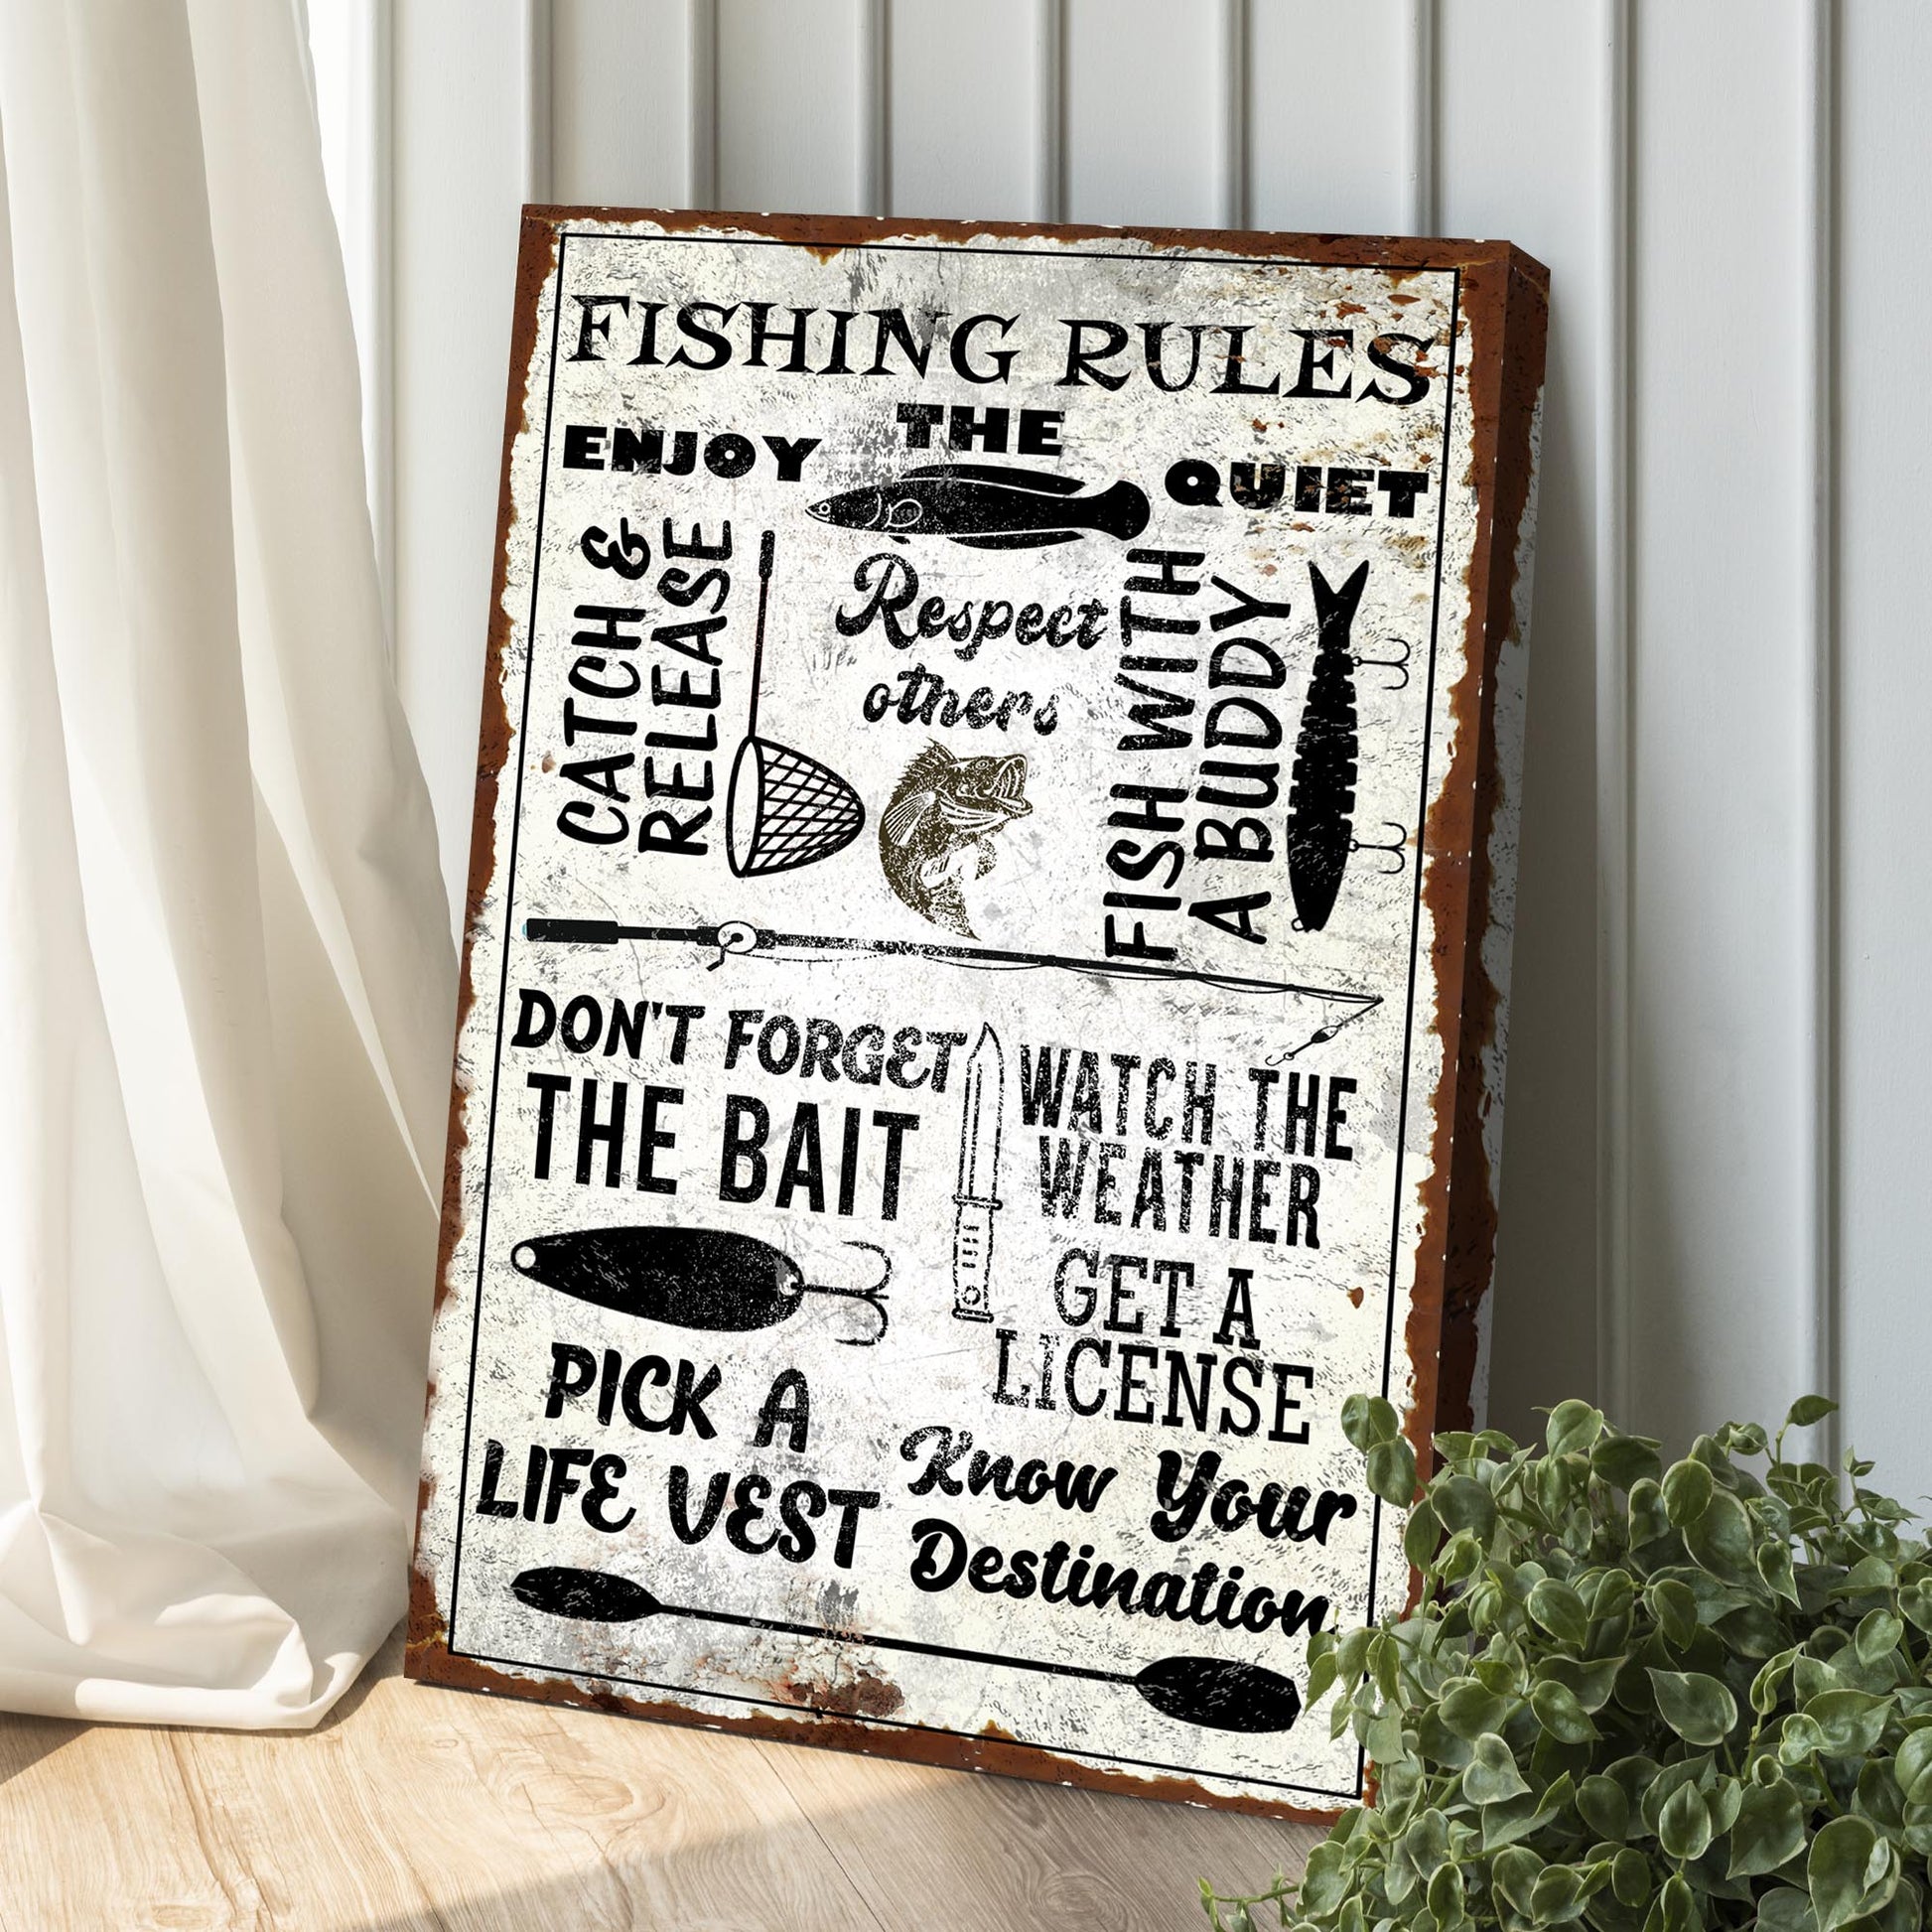 Fishing Rules Sign Style 1 - Image by Tailored Canvases